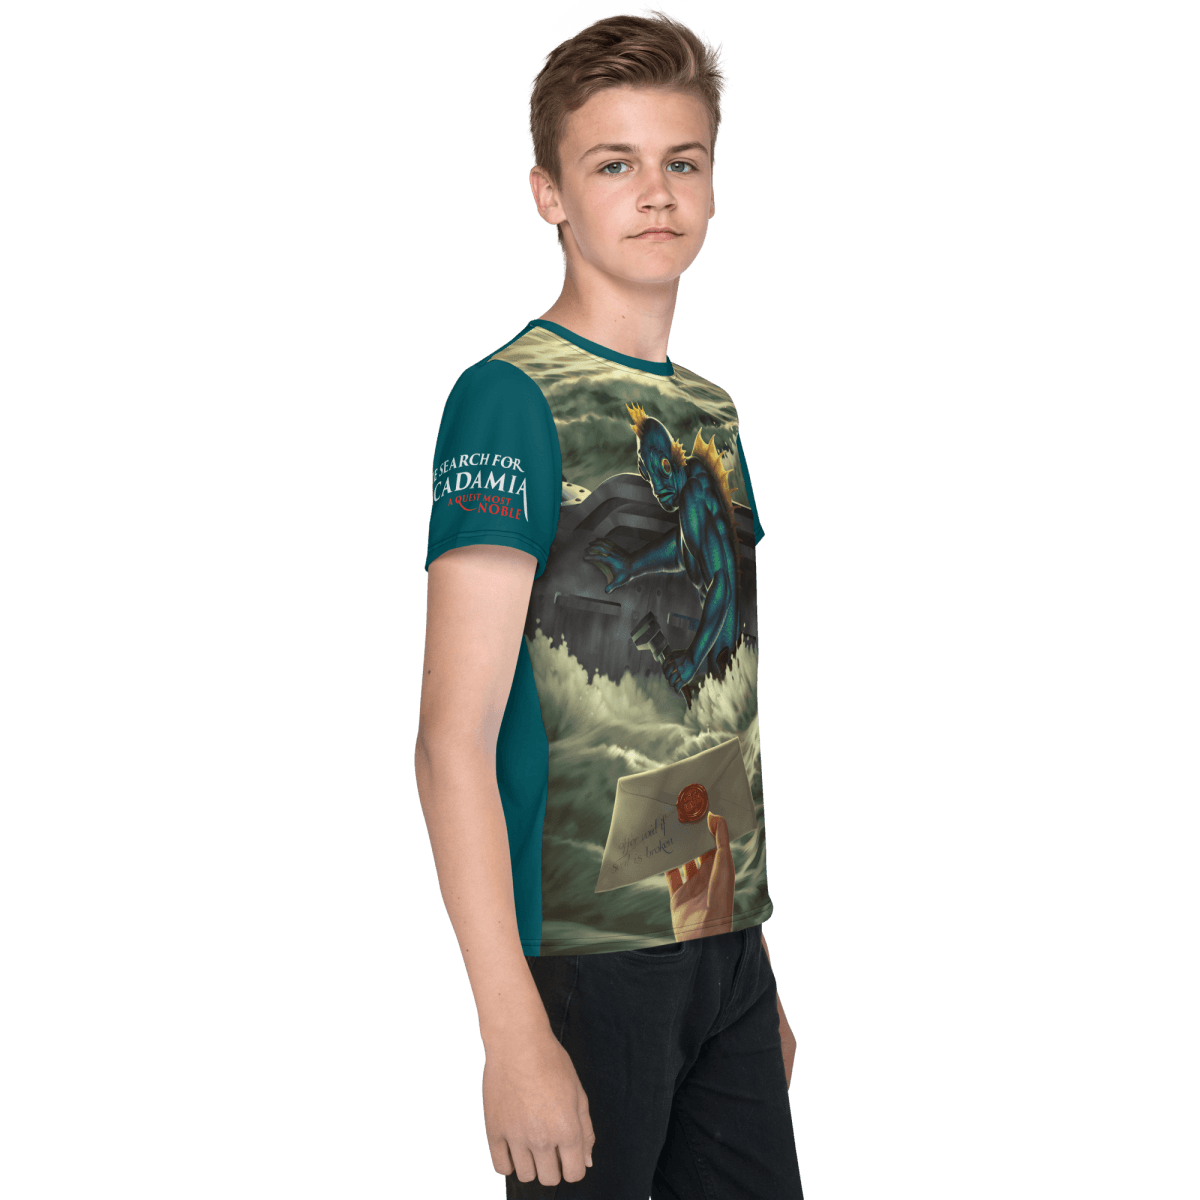 Captain Slager Youth Crew Neck T-Shirt - RG Halleck